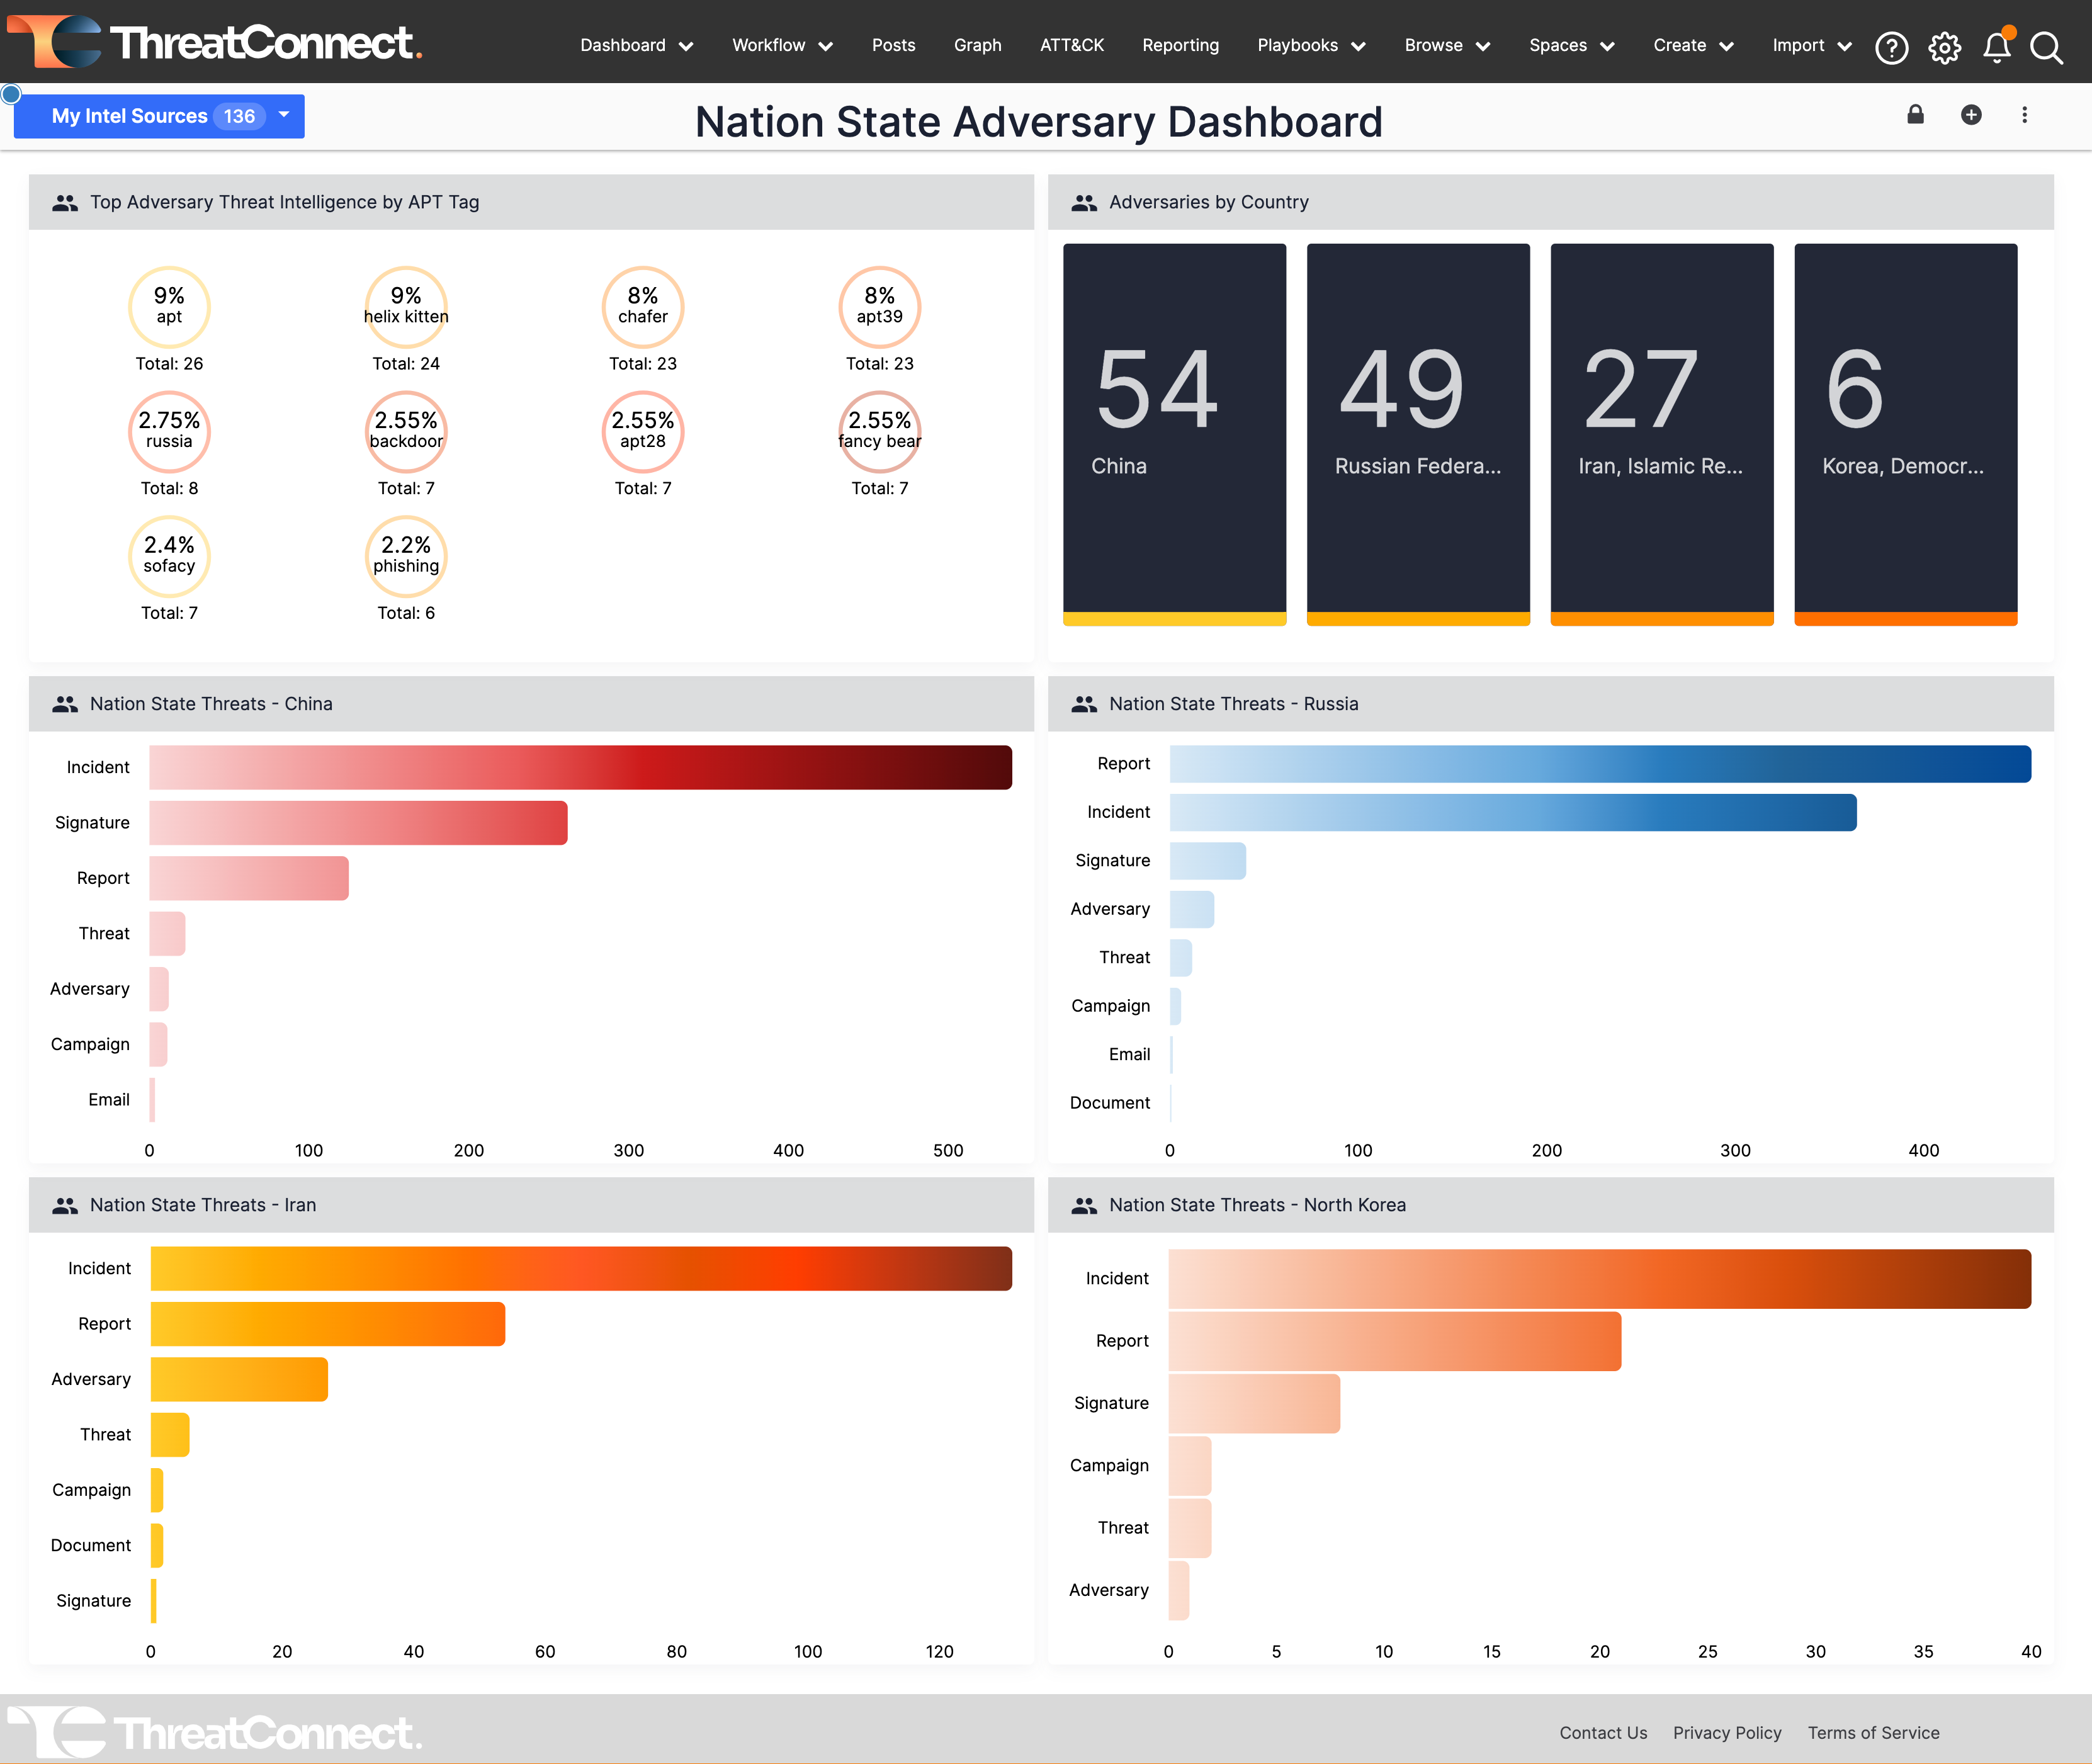 The ThreatConnect TI Ops Platform provides flexible and customizable dashboards to enable the availability of the right information when needed.